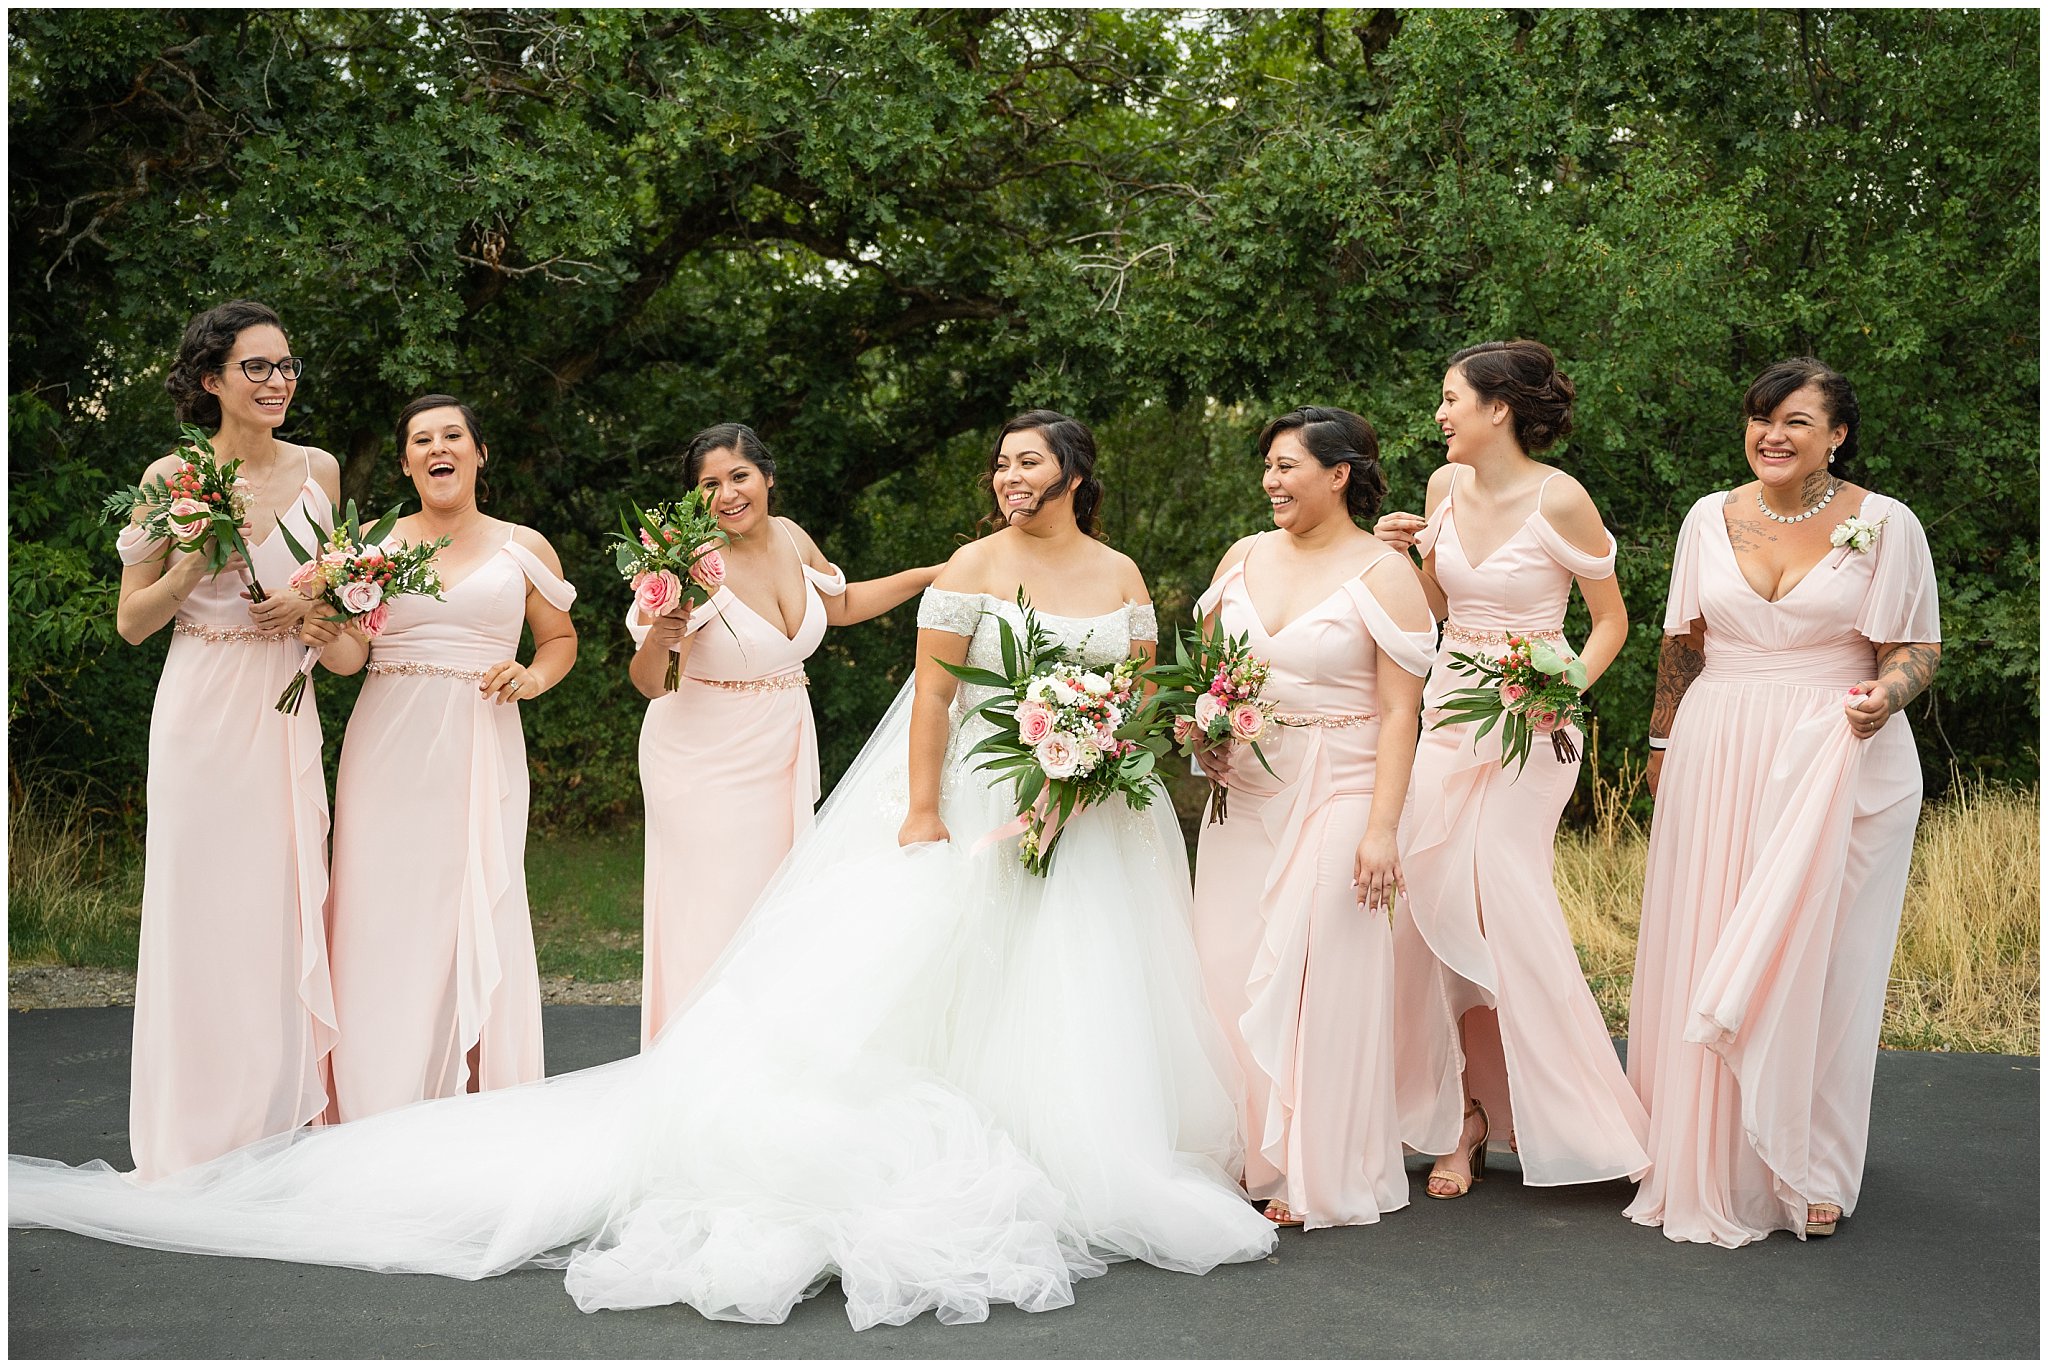 Bride and groom with wedding party in blush dresses and gray suits | Rustic Mountain Destination Wedding at Oak Hills Utah | Jessie and Dallin Photography